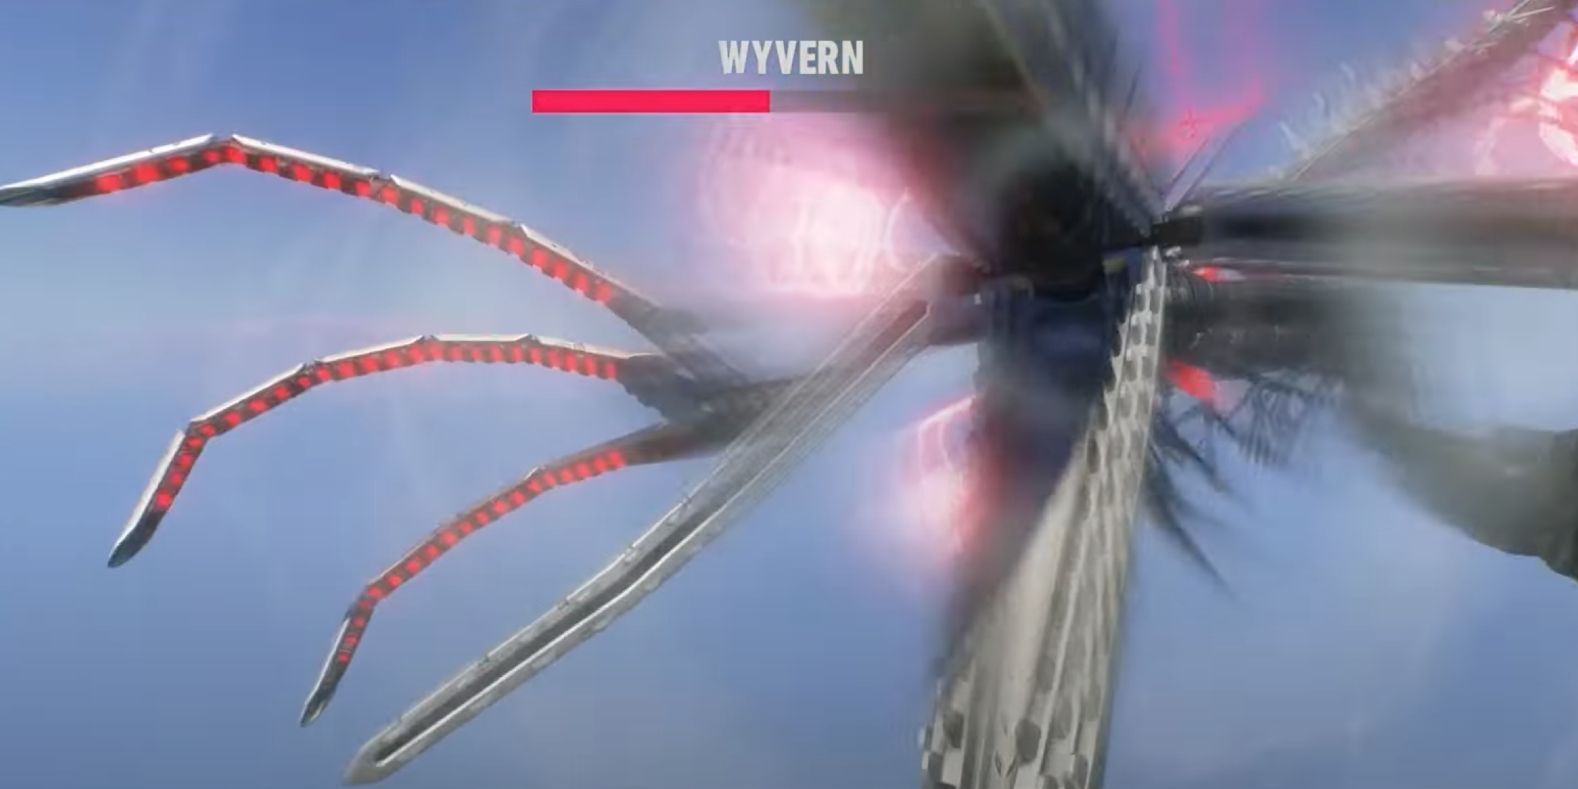 Wyvern attacking in Sonic Frontiers